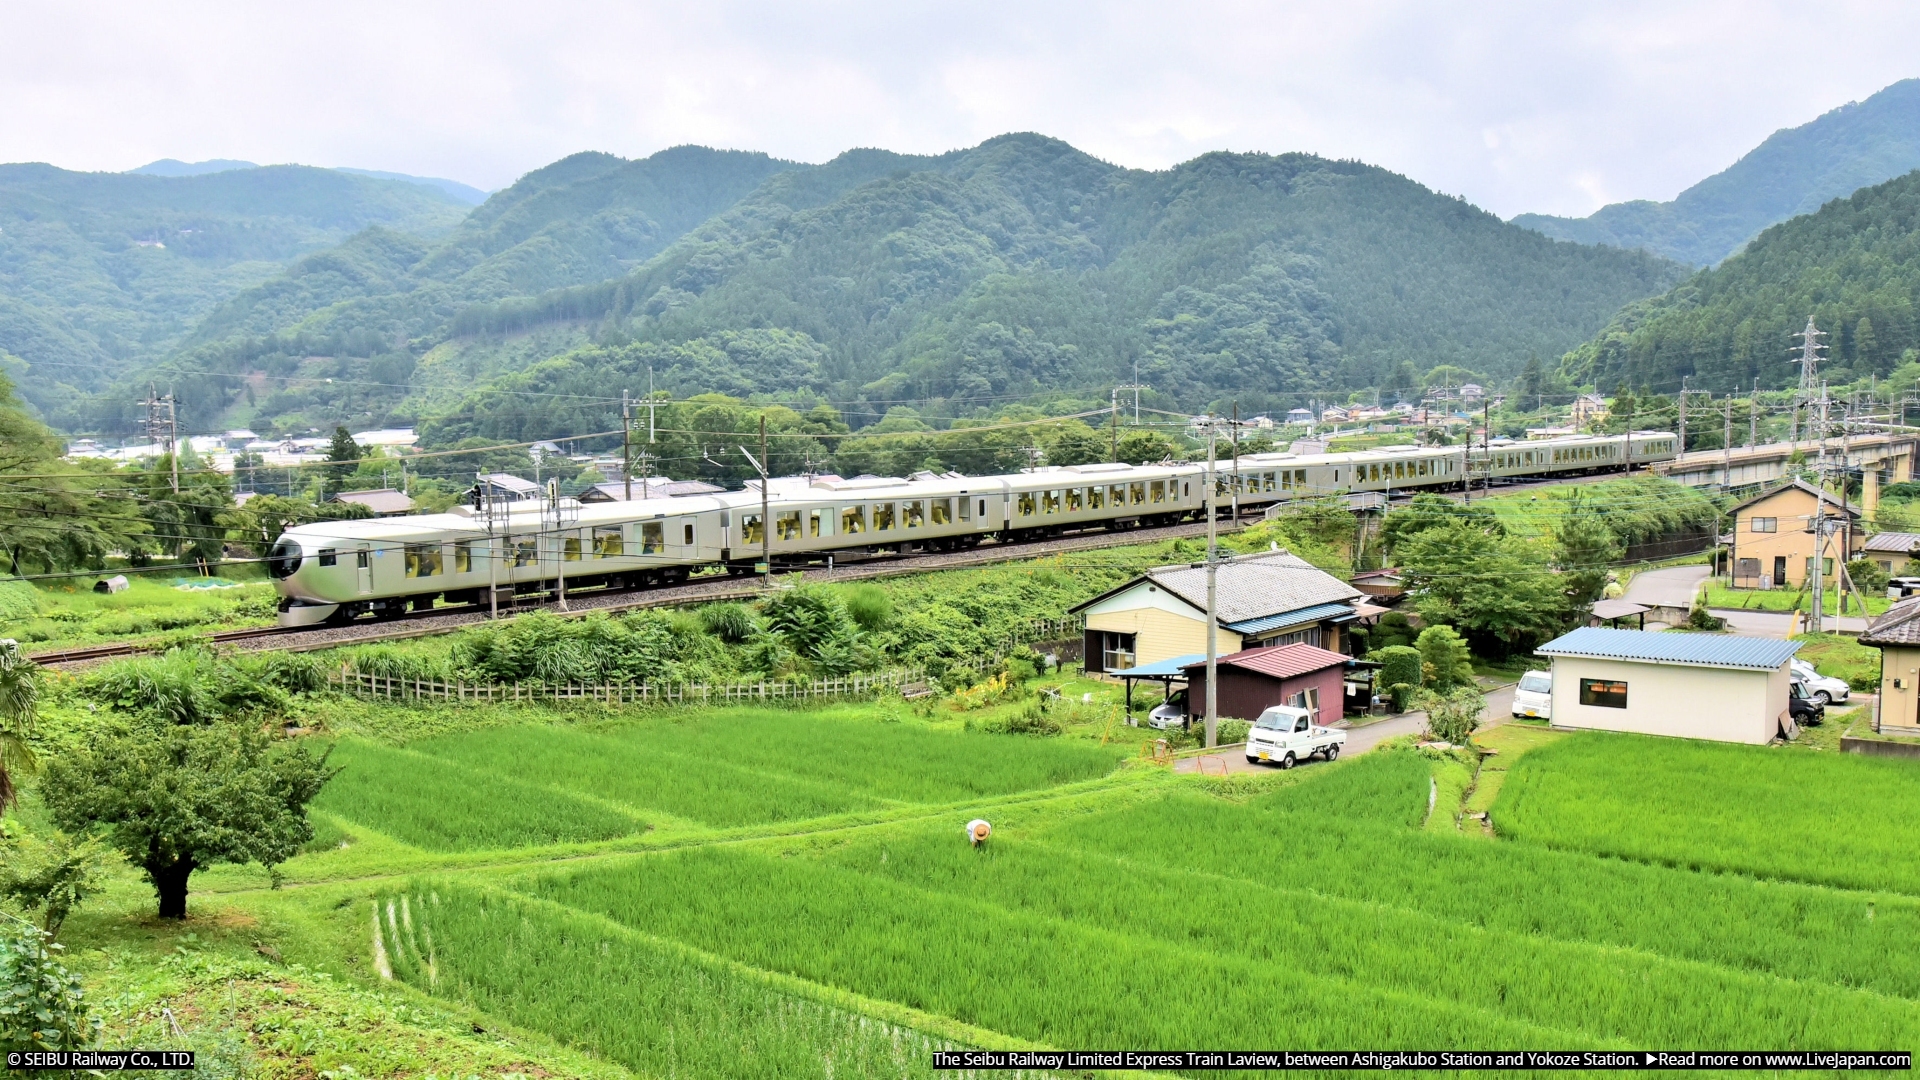 These 20 Incredible Photos of Japans Trains Will Make You Famous